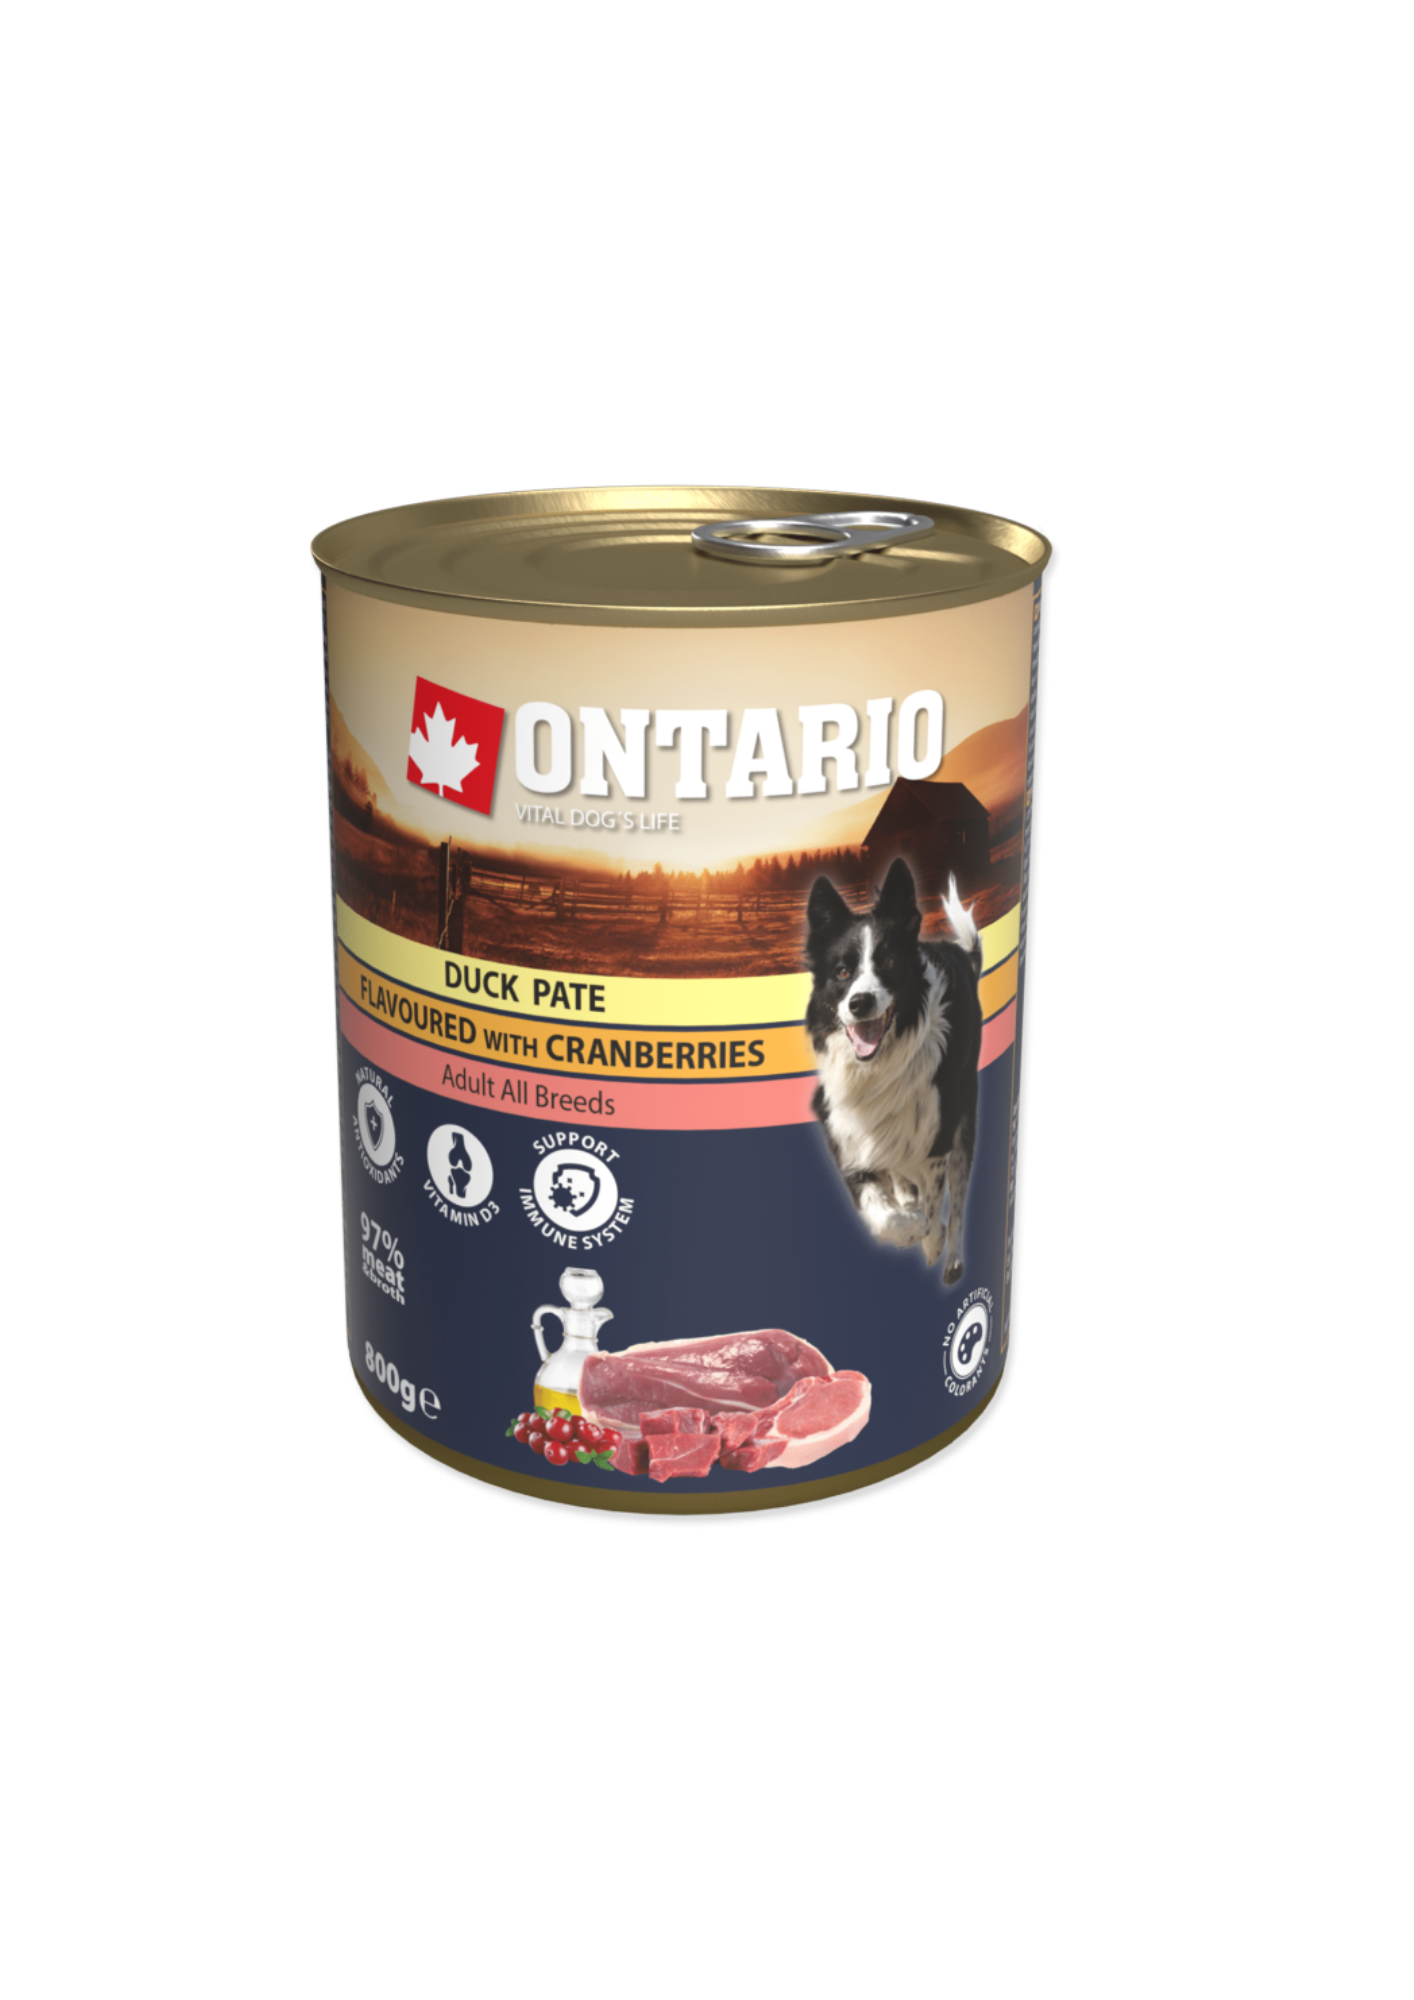 Ontario Wet Dog Food with Duck Pate with Cranberries 800g